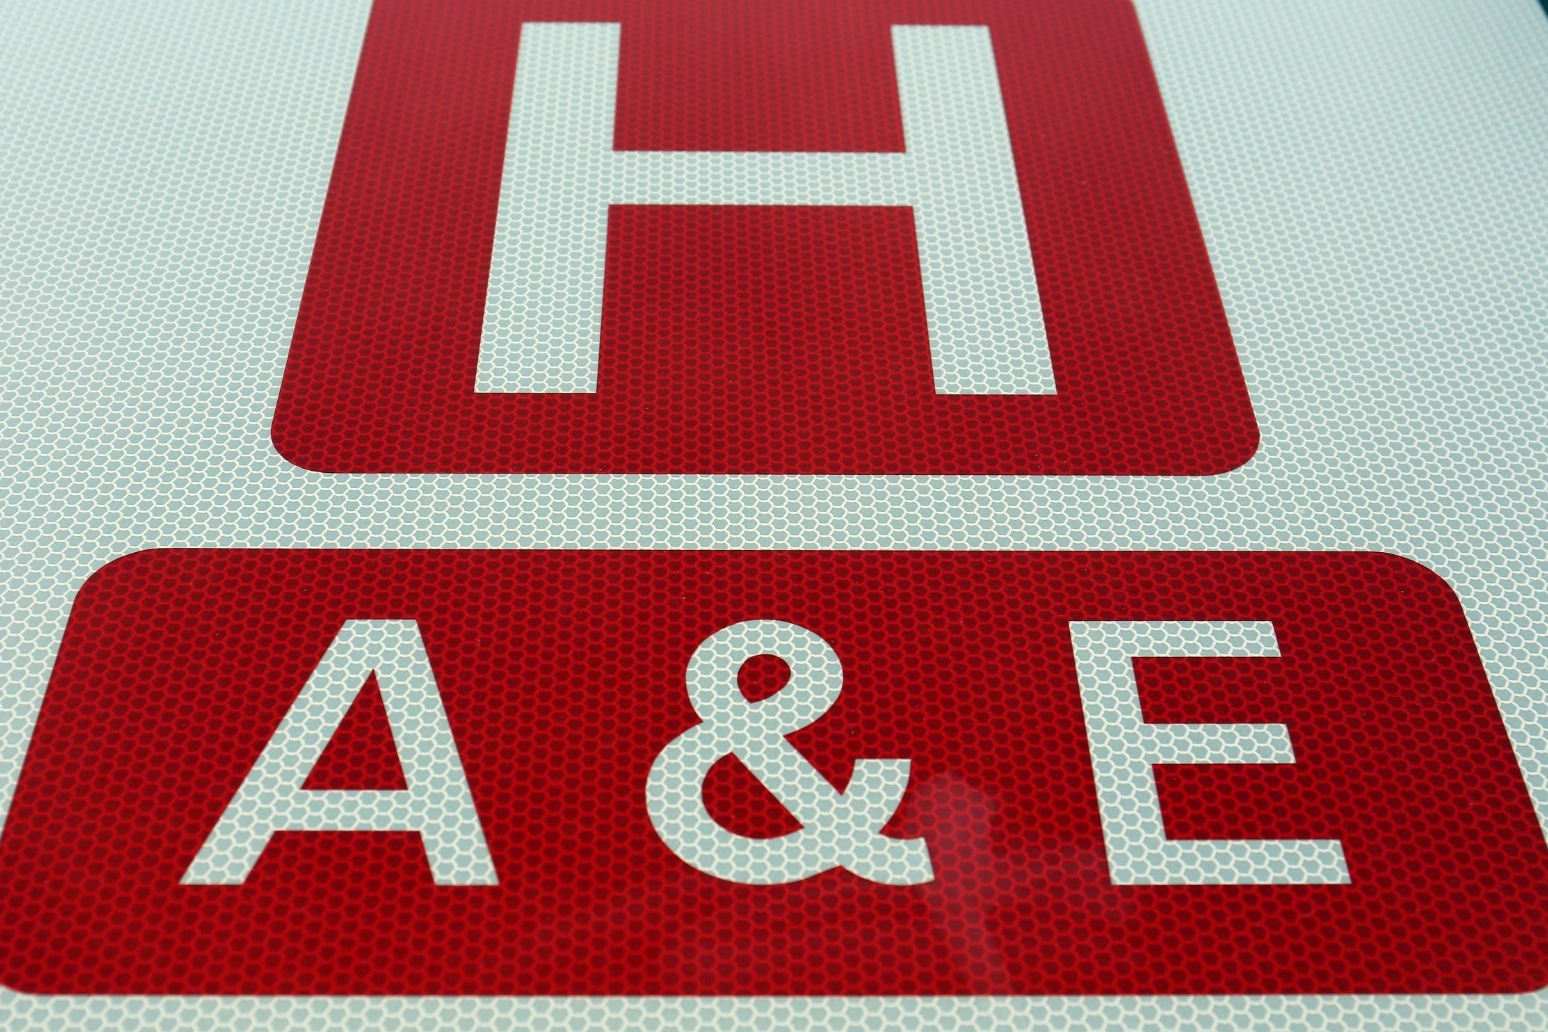 Those from deprived areas ‘more likely to end up in A&E with asthma attack’ 